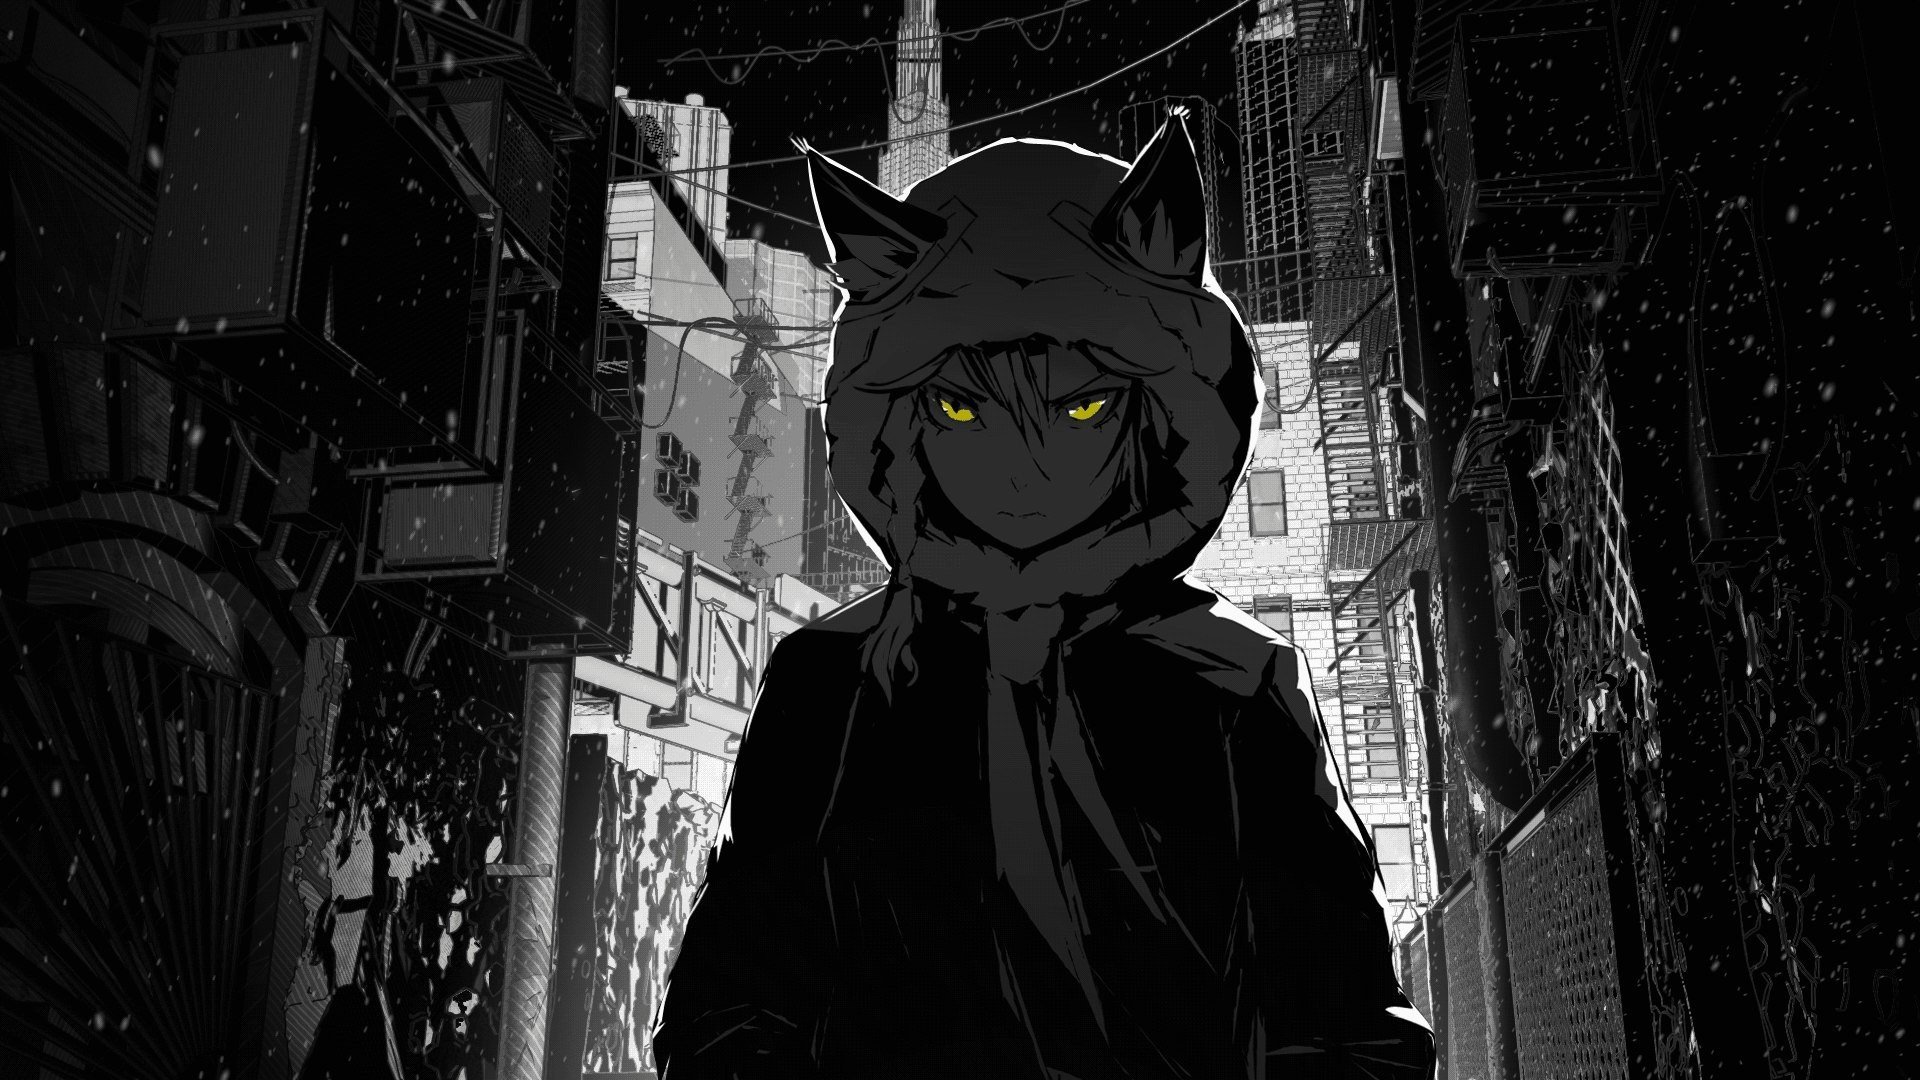 houses, Buildings, Nekomimi, Jackets, Stairways, Short, Hair, Grayscale, Skyscrapers, Yellow, Eyes, Snowflakes, Hoodies, Braids, Selective, Coloring, Scarfs, Anime, Girls, Cables, Cities Wallpaper